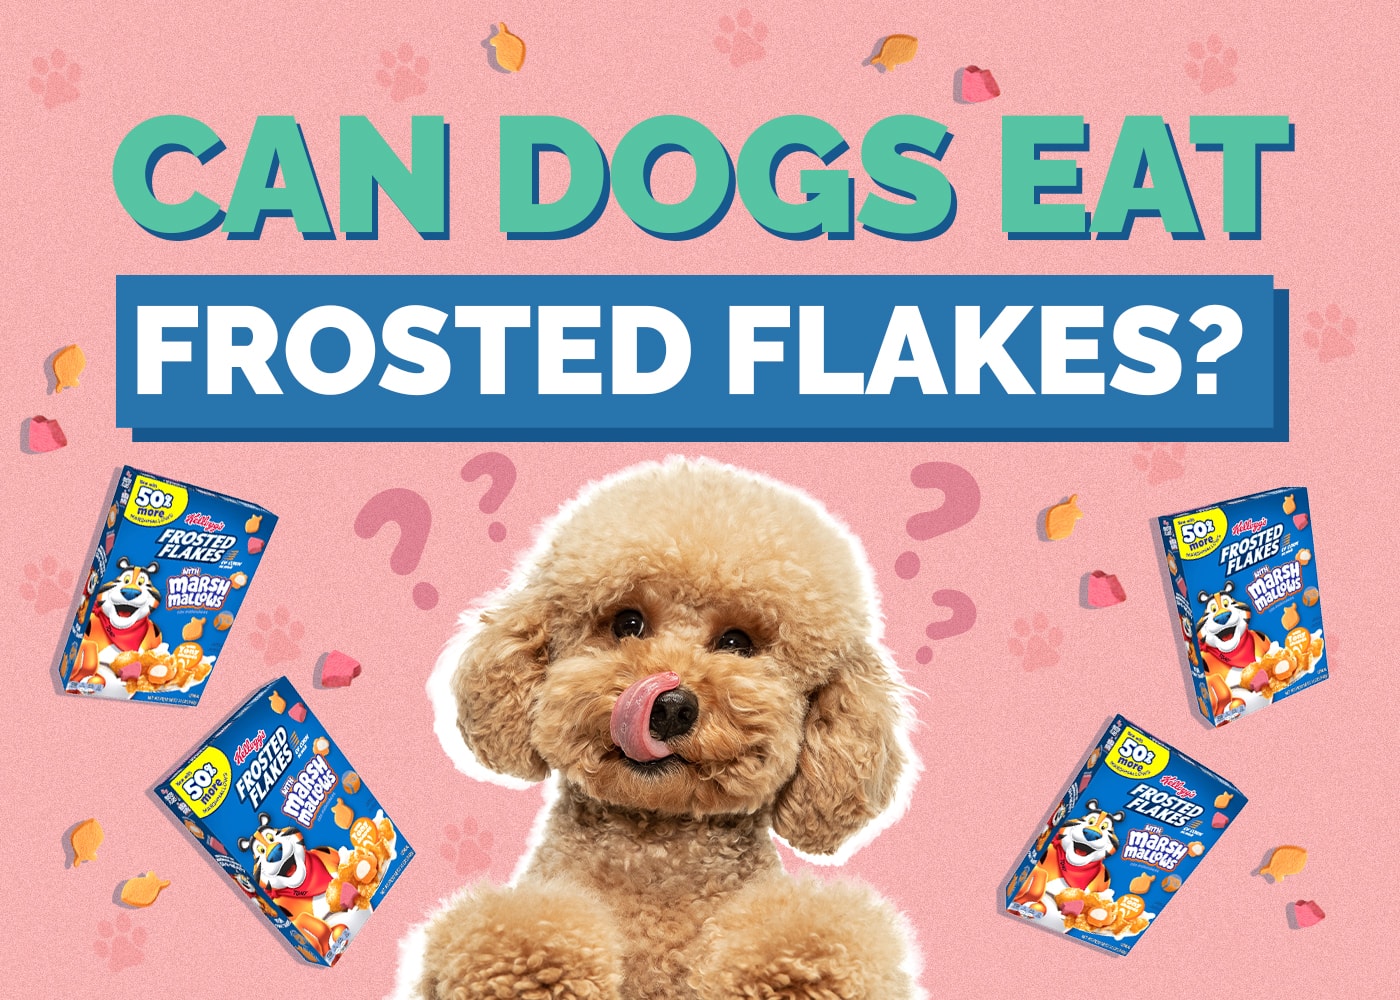 Can Dogs Eat Frosted Flakes